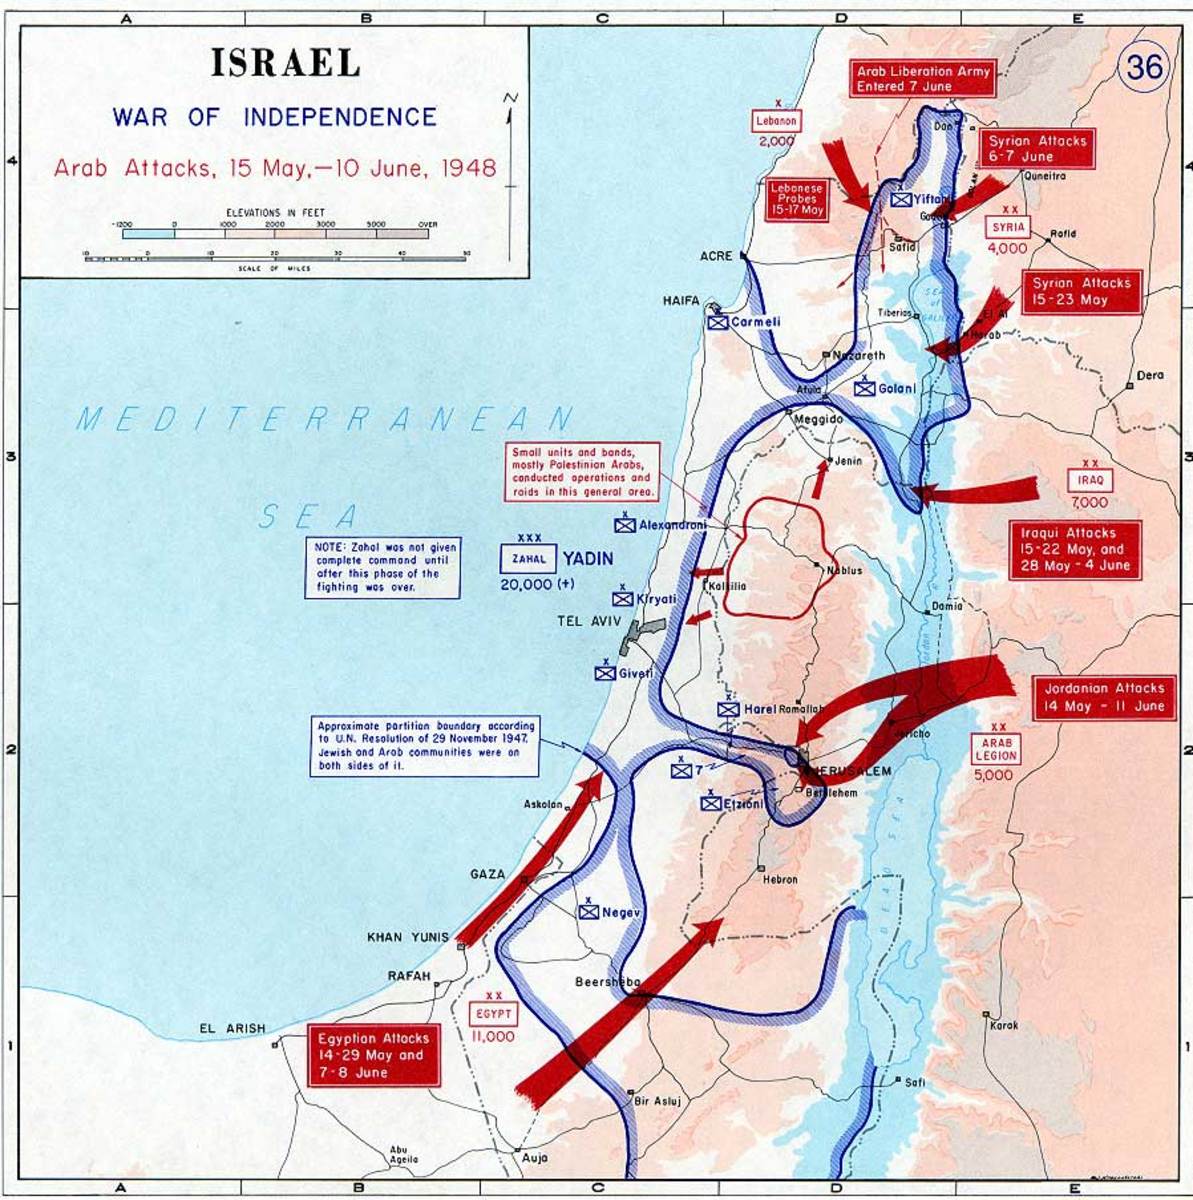 MUSLIM ATTACKS ON THE STATE OF ISRAEL IN 1948 DURING THE ISRAEL WAR OF INDEPENDENCE